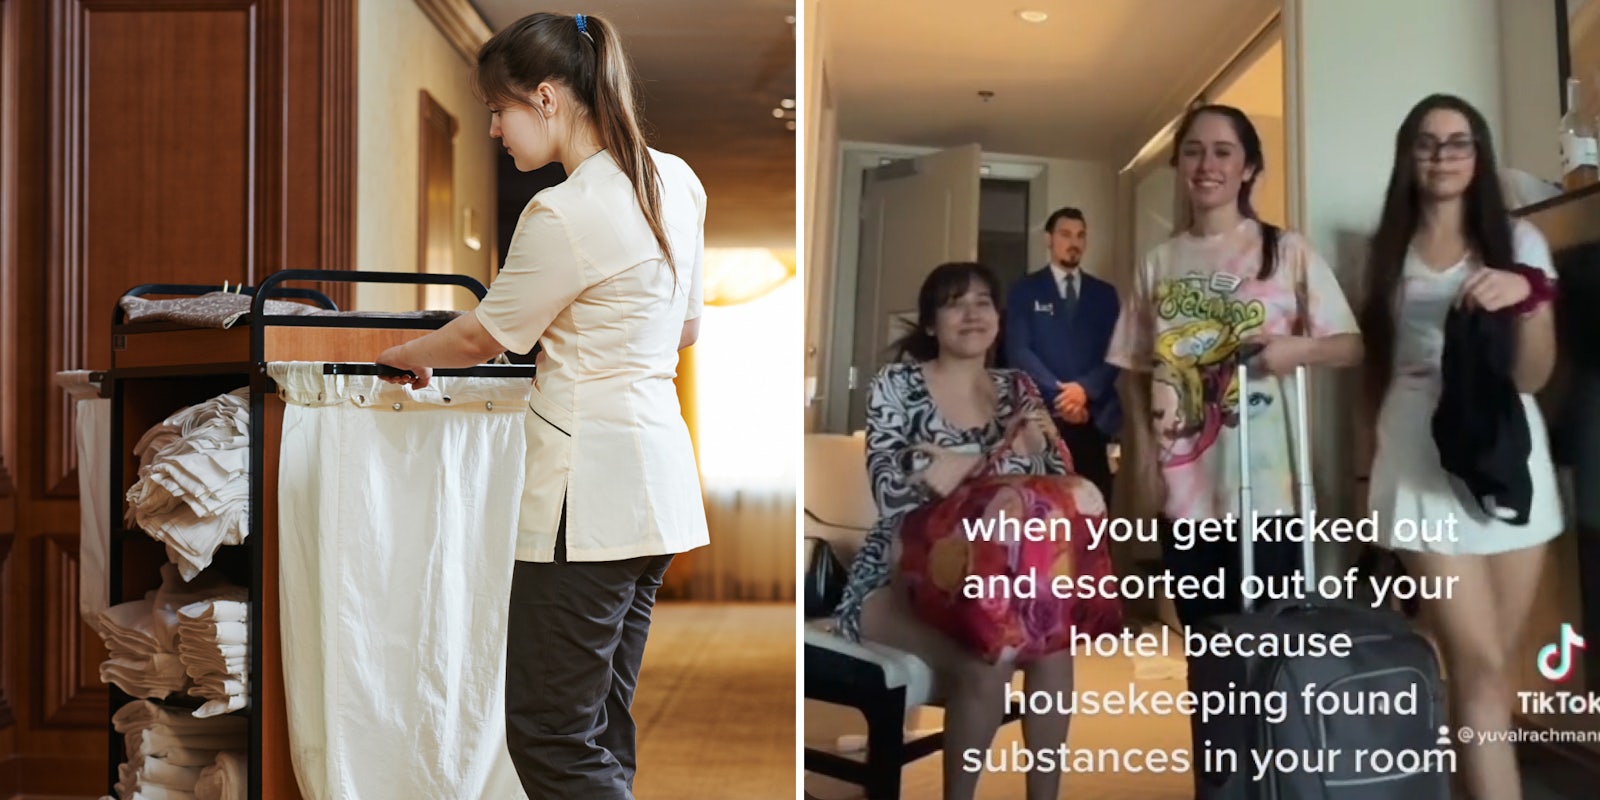 house keeping cart and hotel worker (l) group of girls in hotel room with man in suit behind caption 'when you get kicked out and escorted out of your hotel because housekeeping found substances in your room' (r)